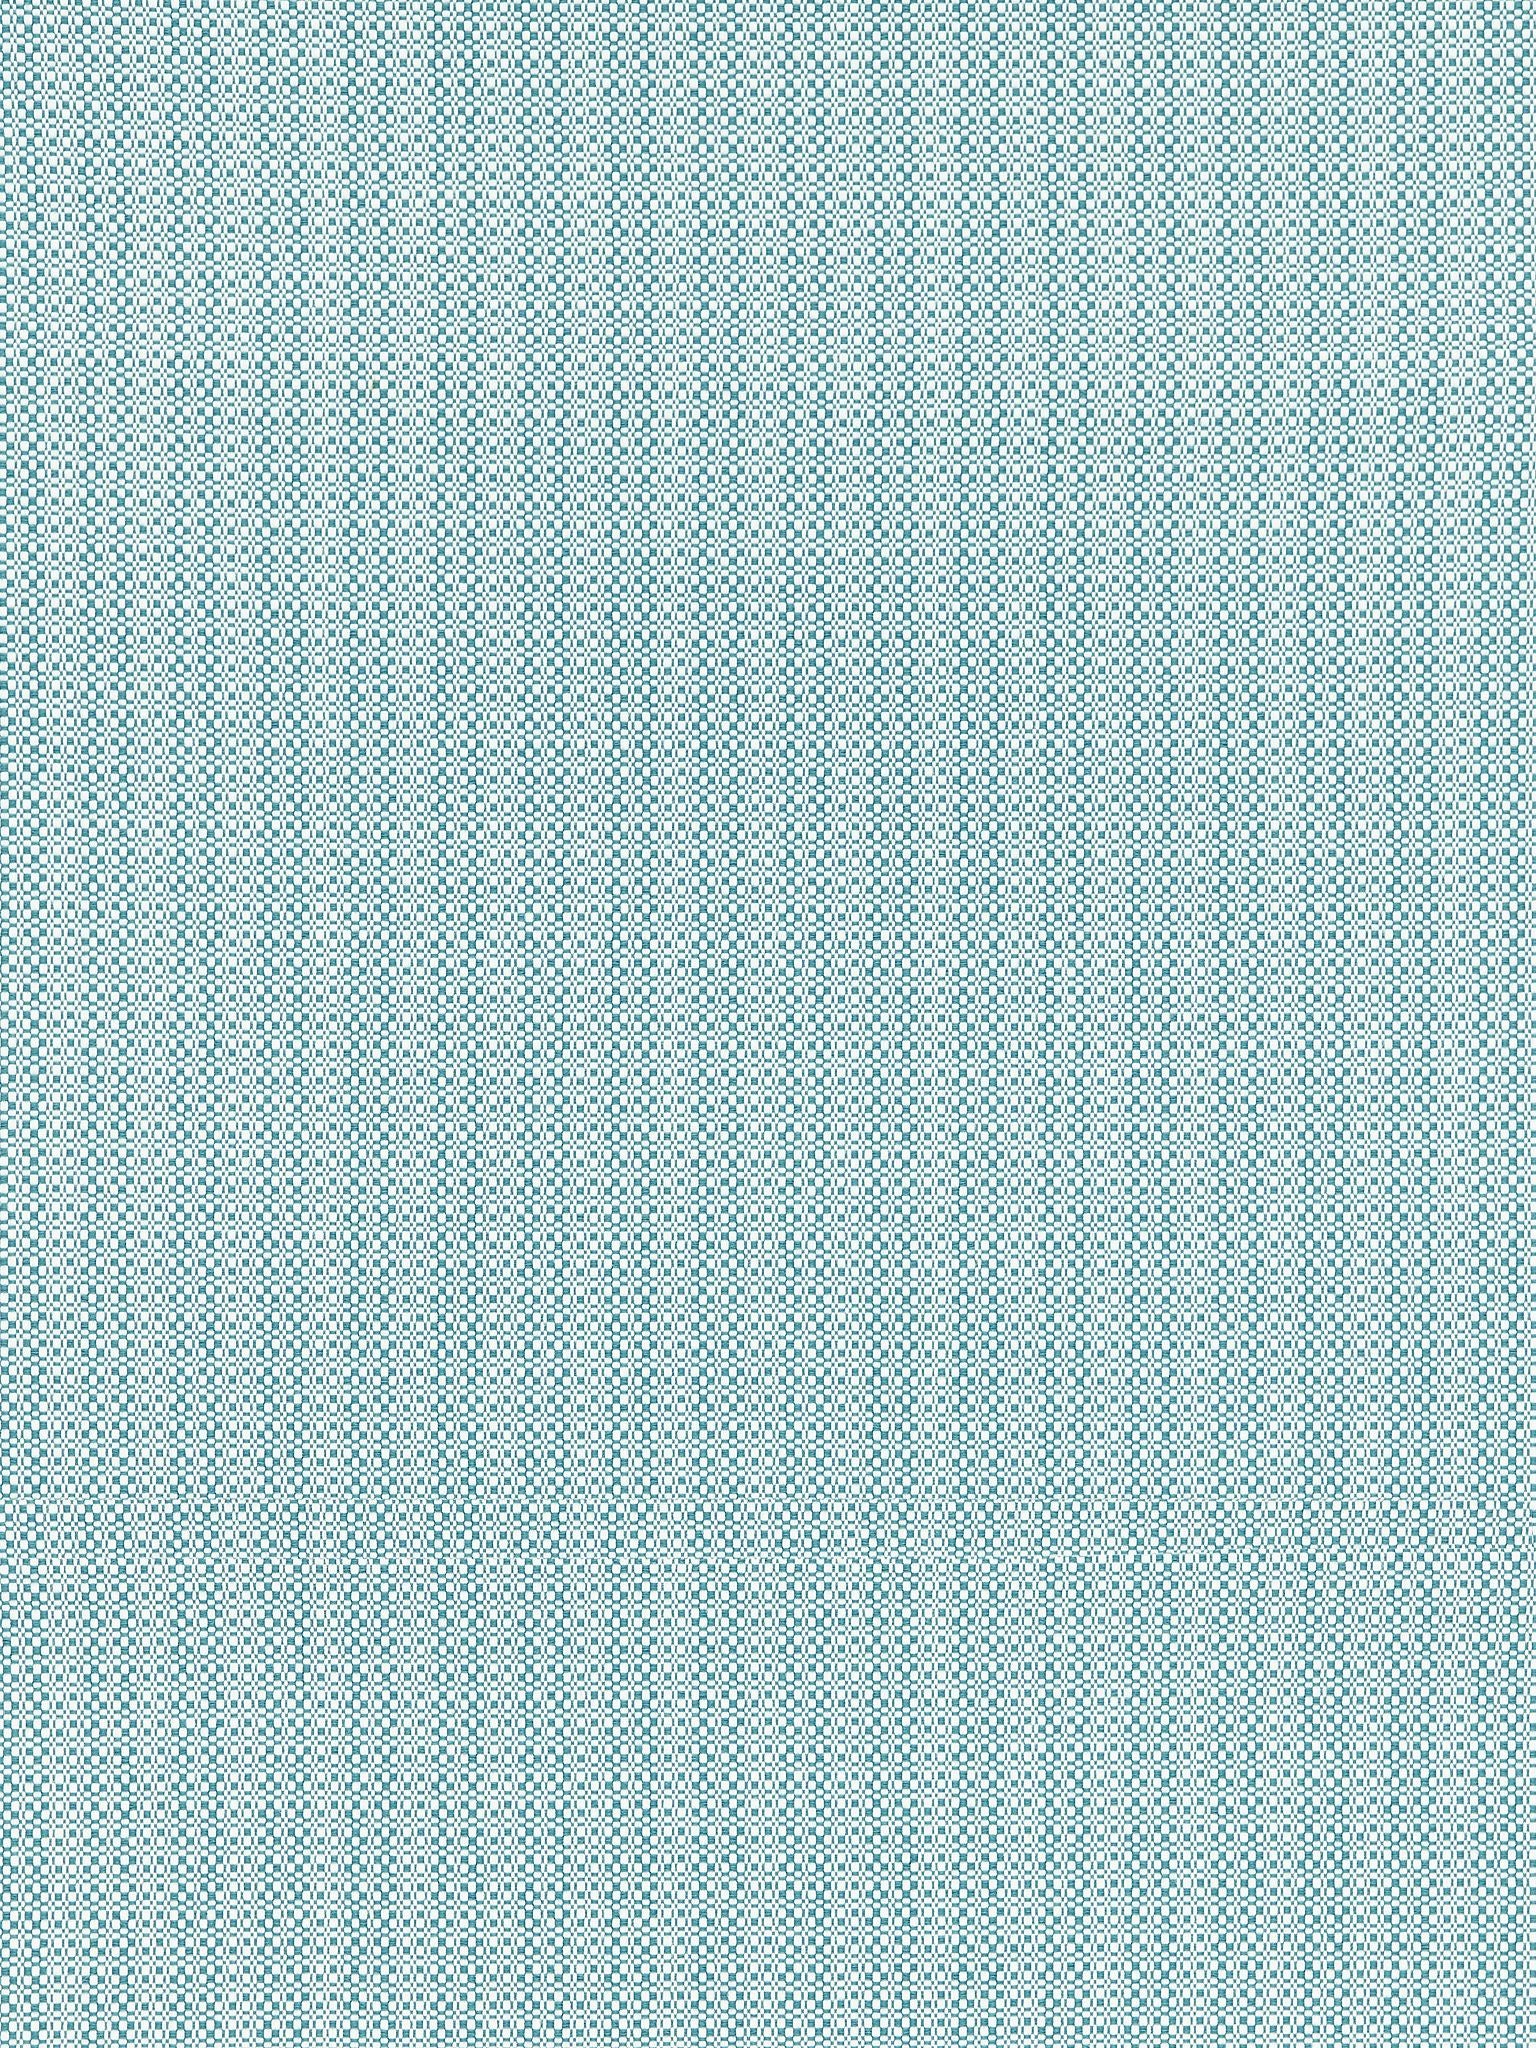 Tahiti Tweed fabric in turquoise color - pattern number SC 000327192 - by Scalamandre in the Scalamandre Fabrics Book 1 collection